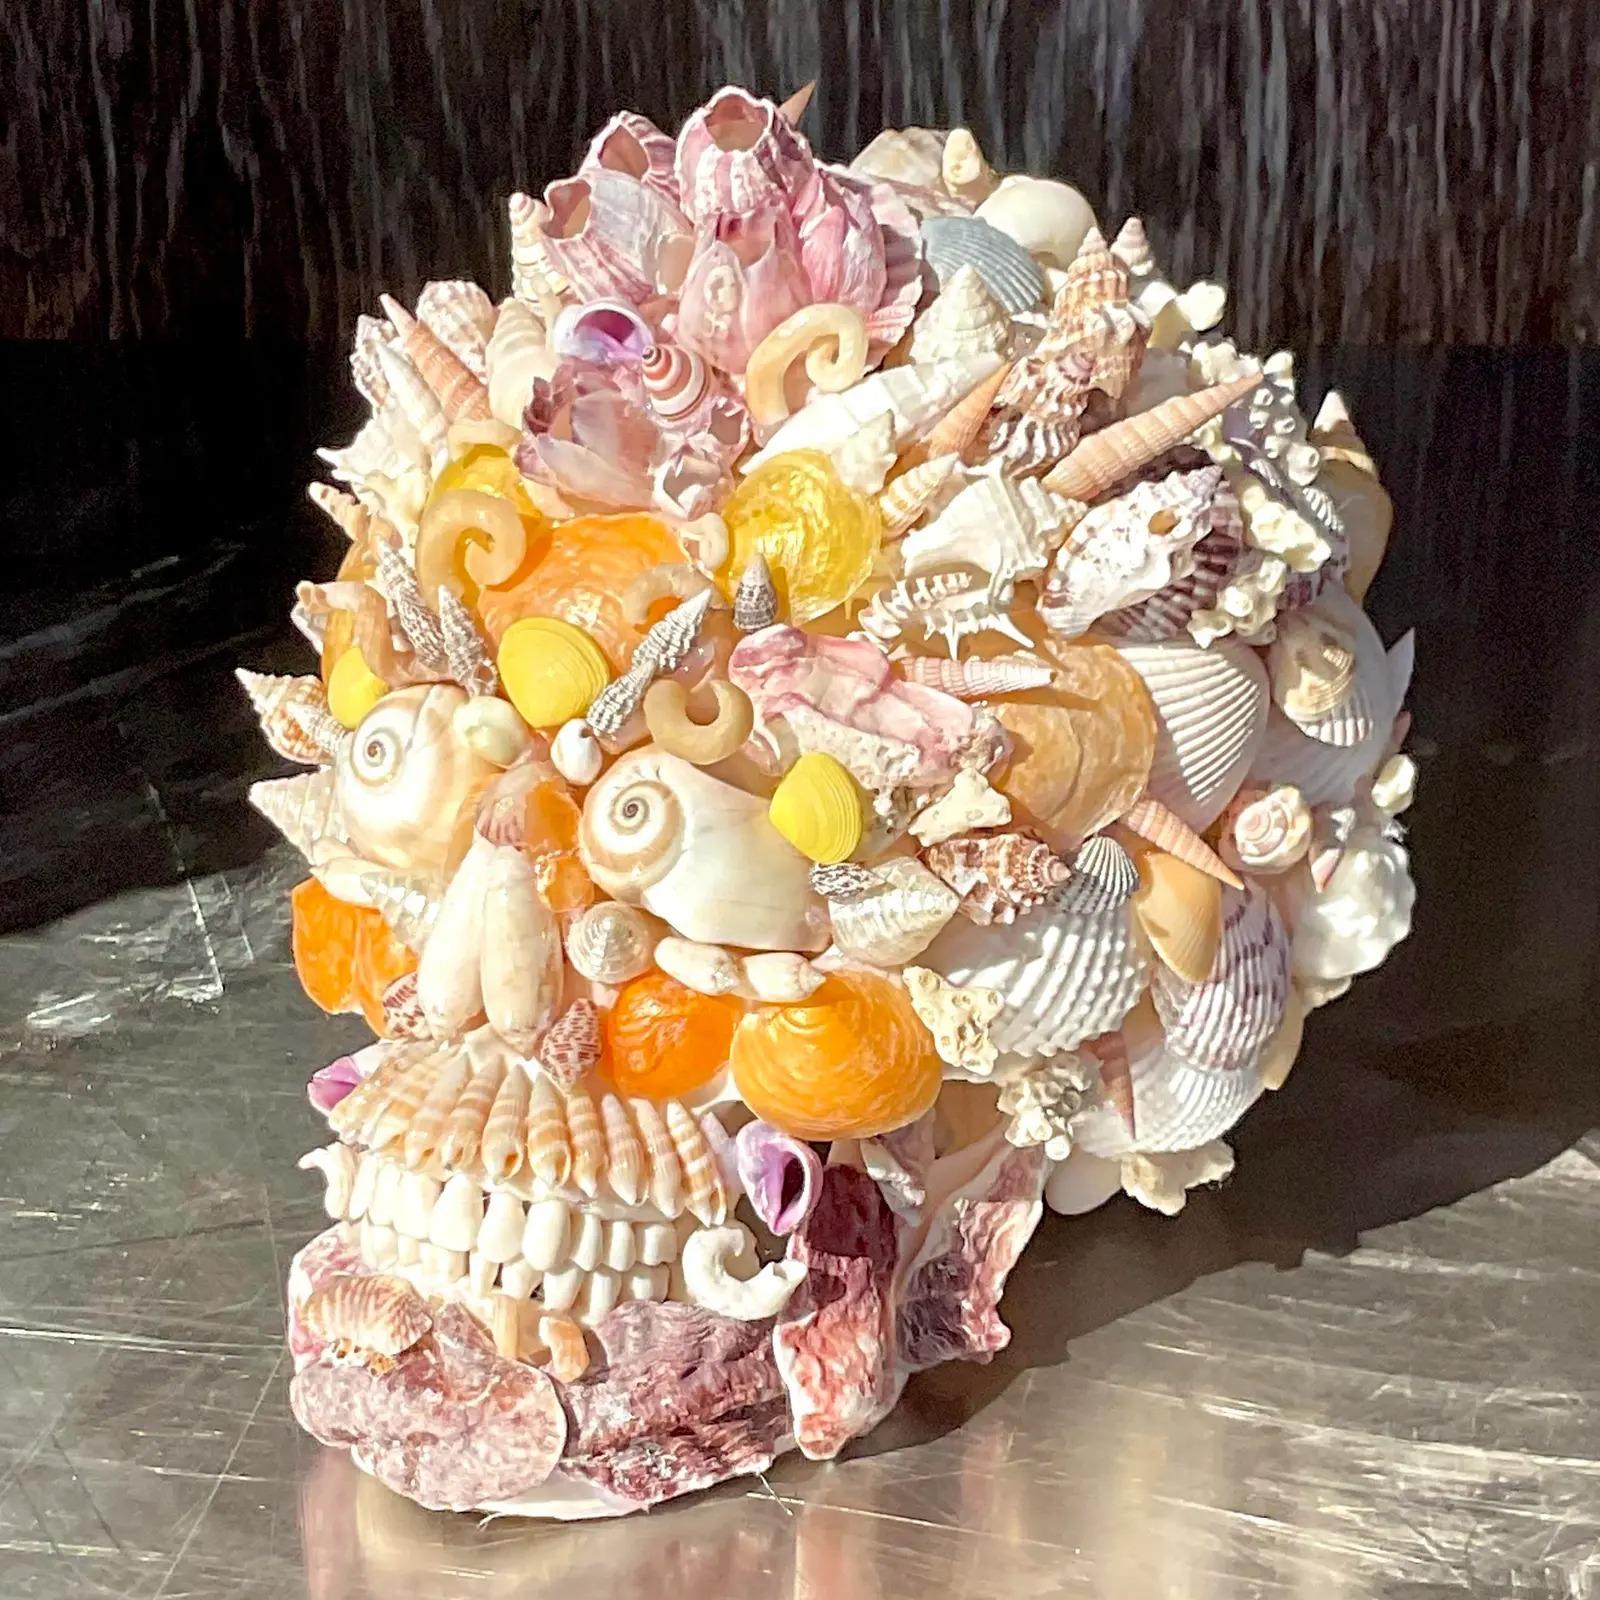 A fantastic vintage coastal hand placed shell encrusted skull. A fabulous selection of brightly colored shells in the most clever design. Acquired from a Palm Beach estate.